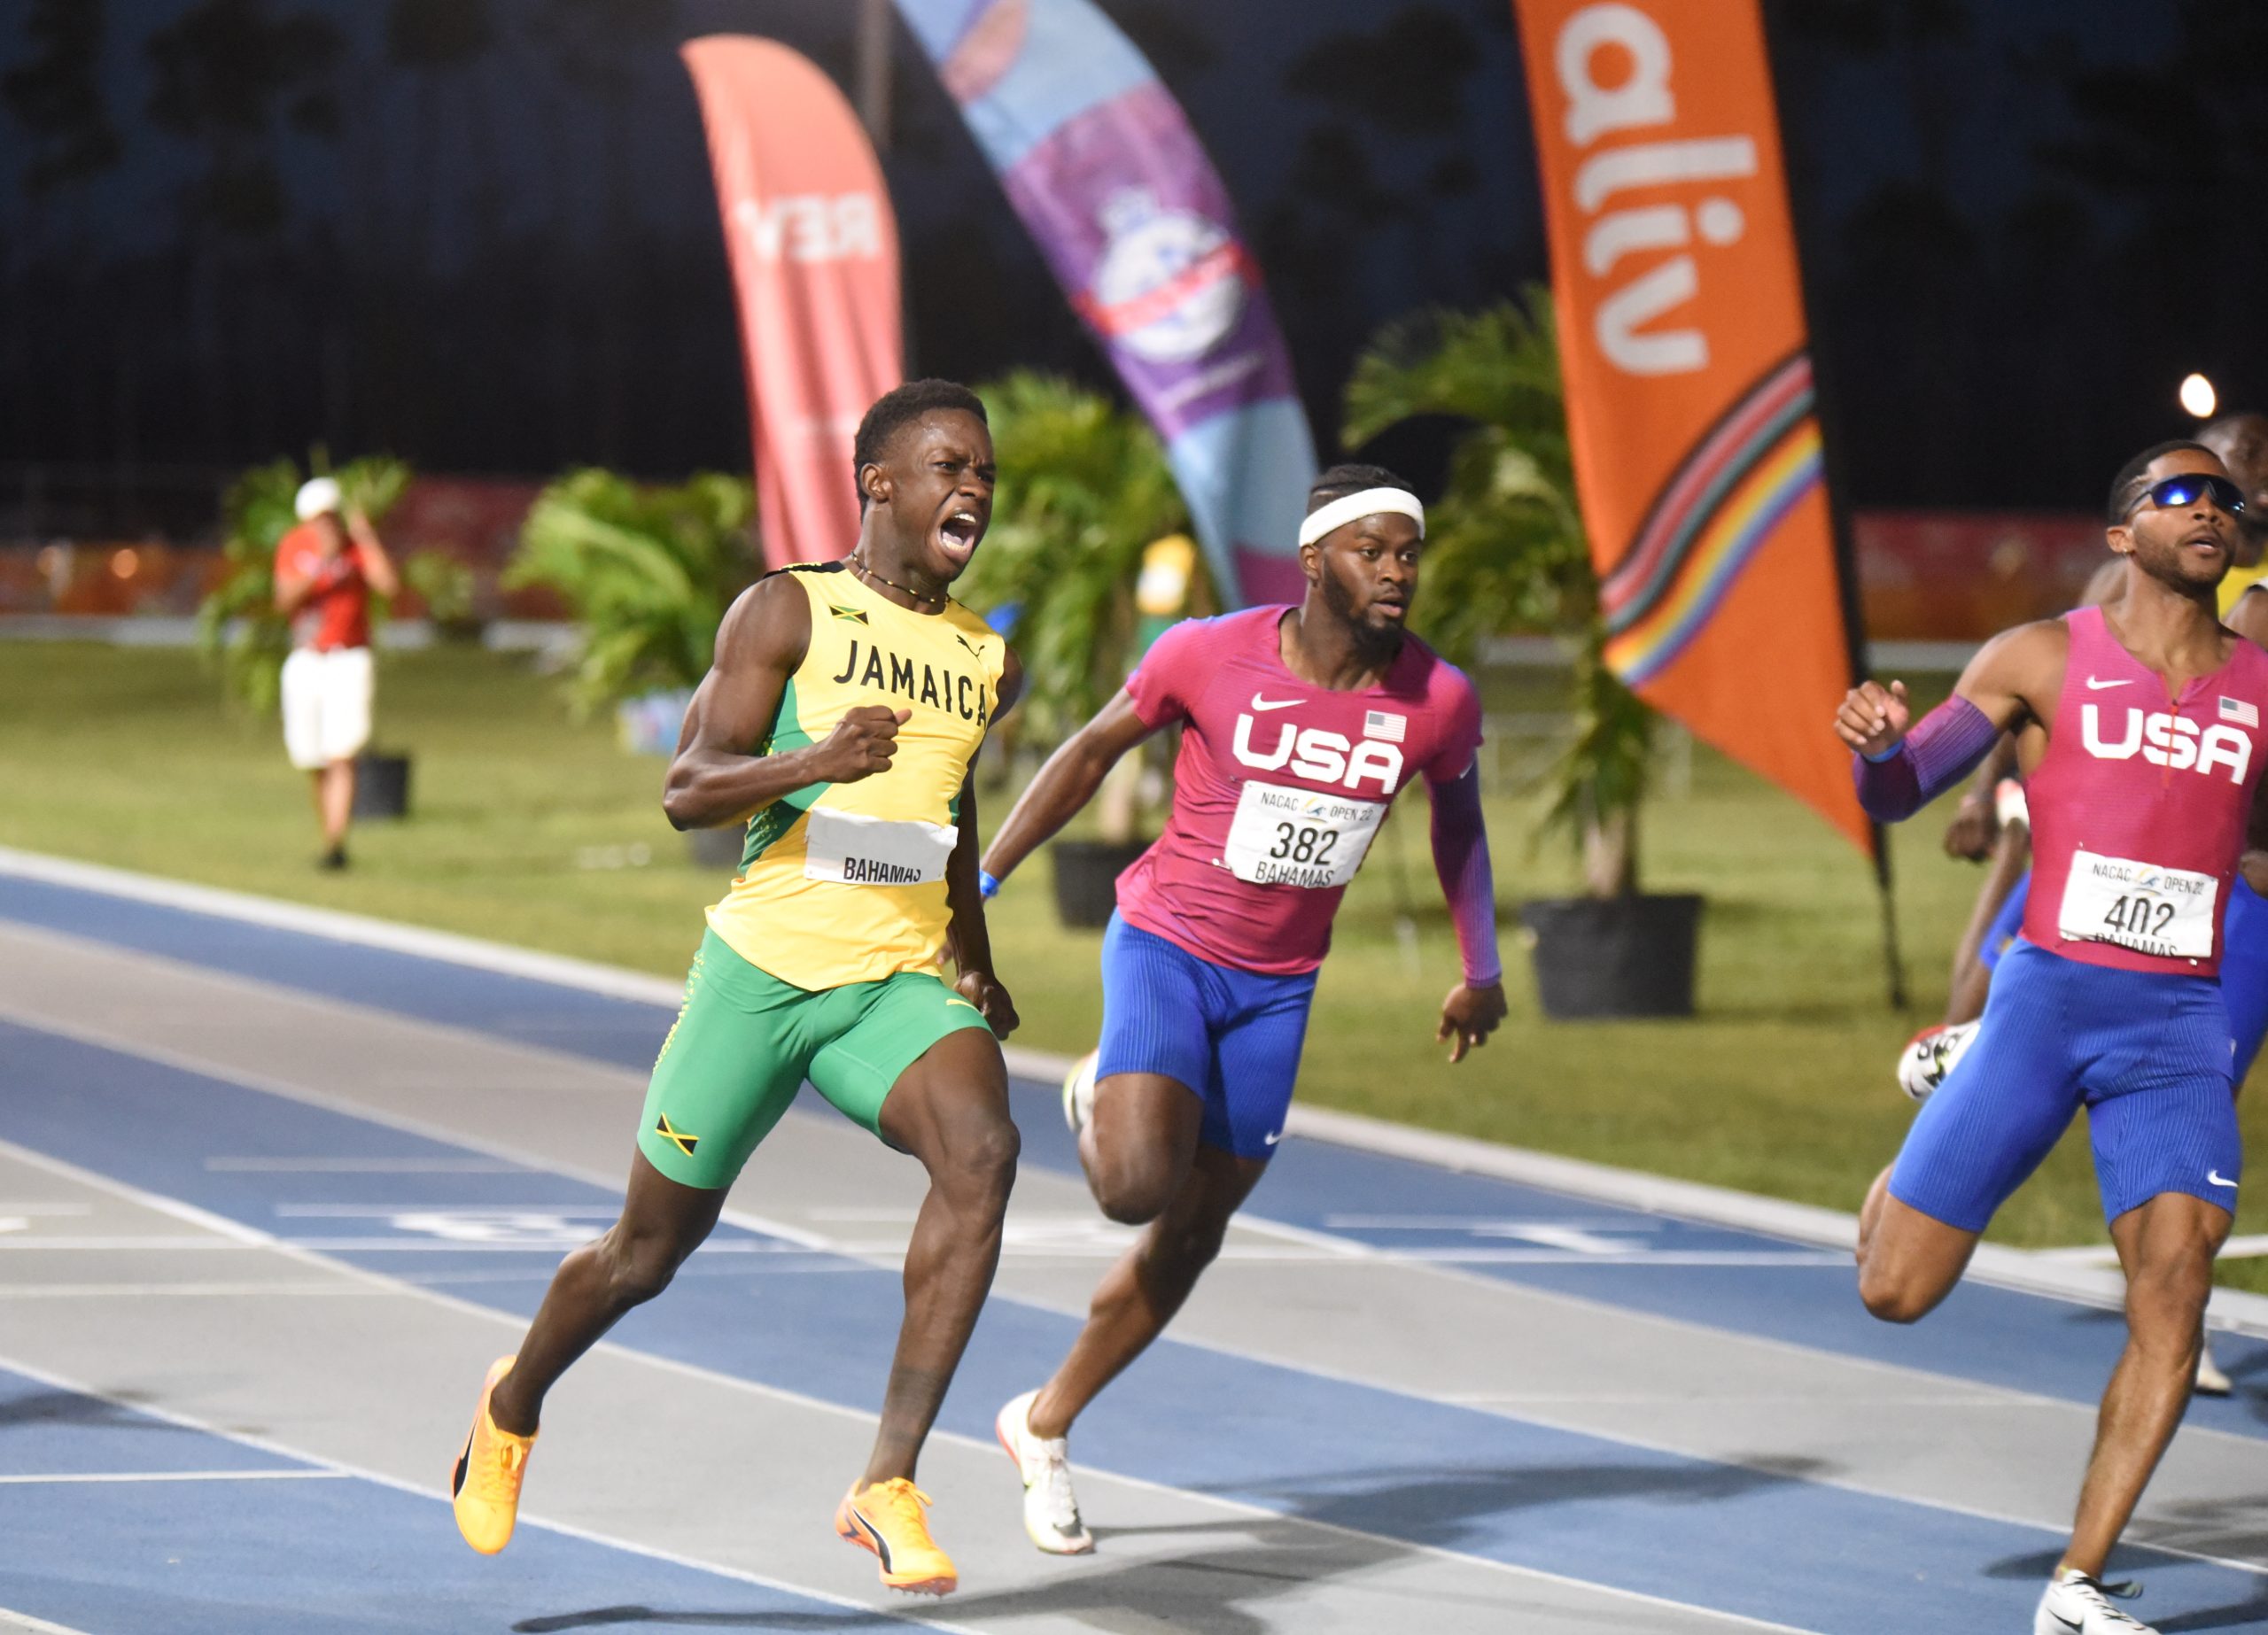 Jamaican Ackeem Blake wins the men's 100m in a championship record 9.98 at the NACAC Open Championships in Freeport, Grand Bahamas